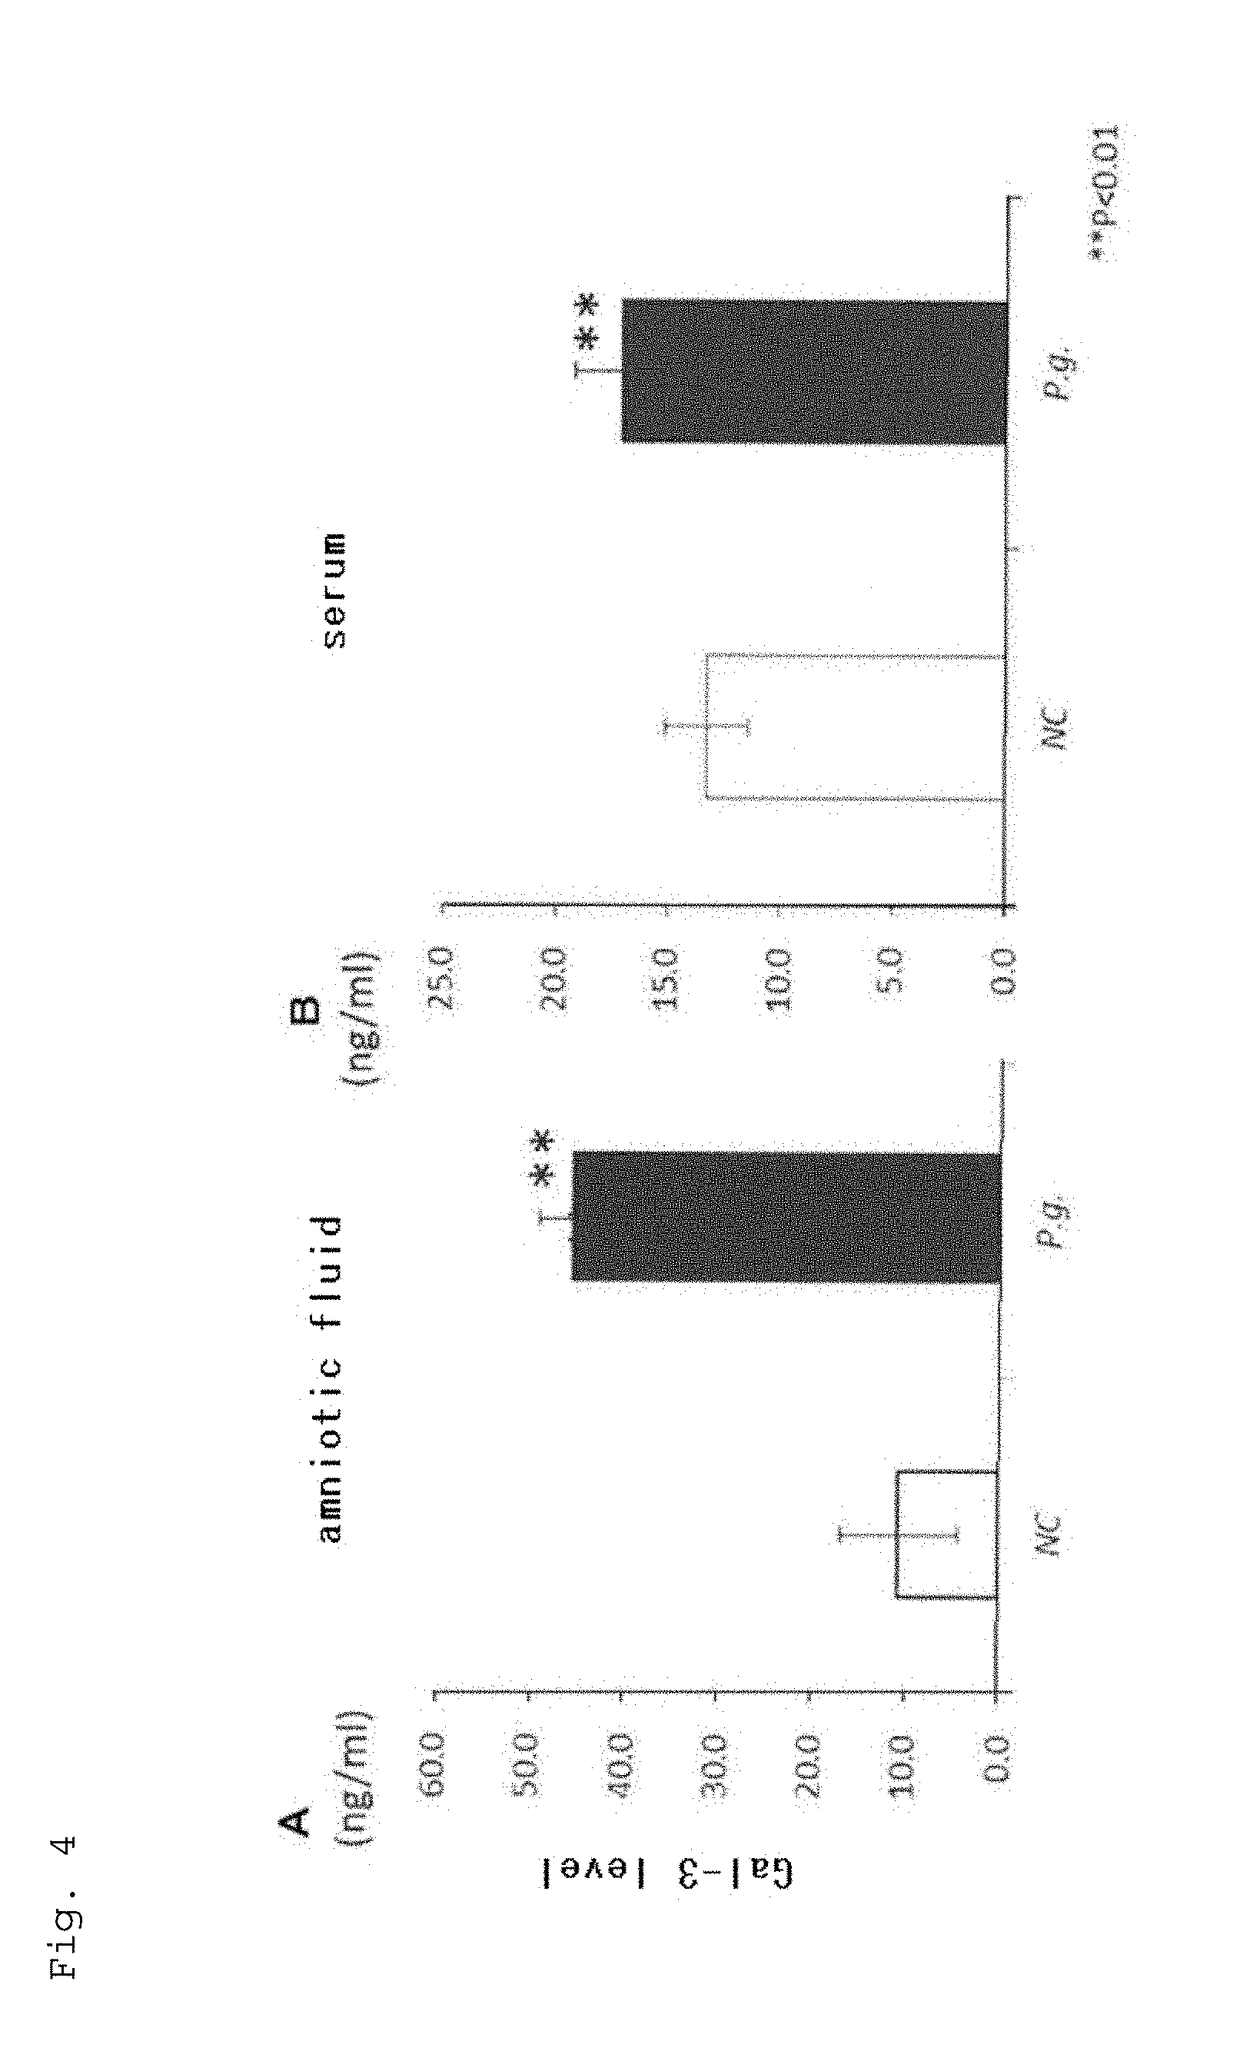 Method and Kit for Determining Risk of Preterm Birth and/or Birth of Low-Birth-Weight Baby